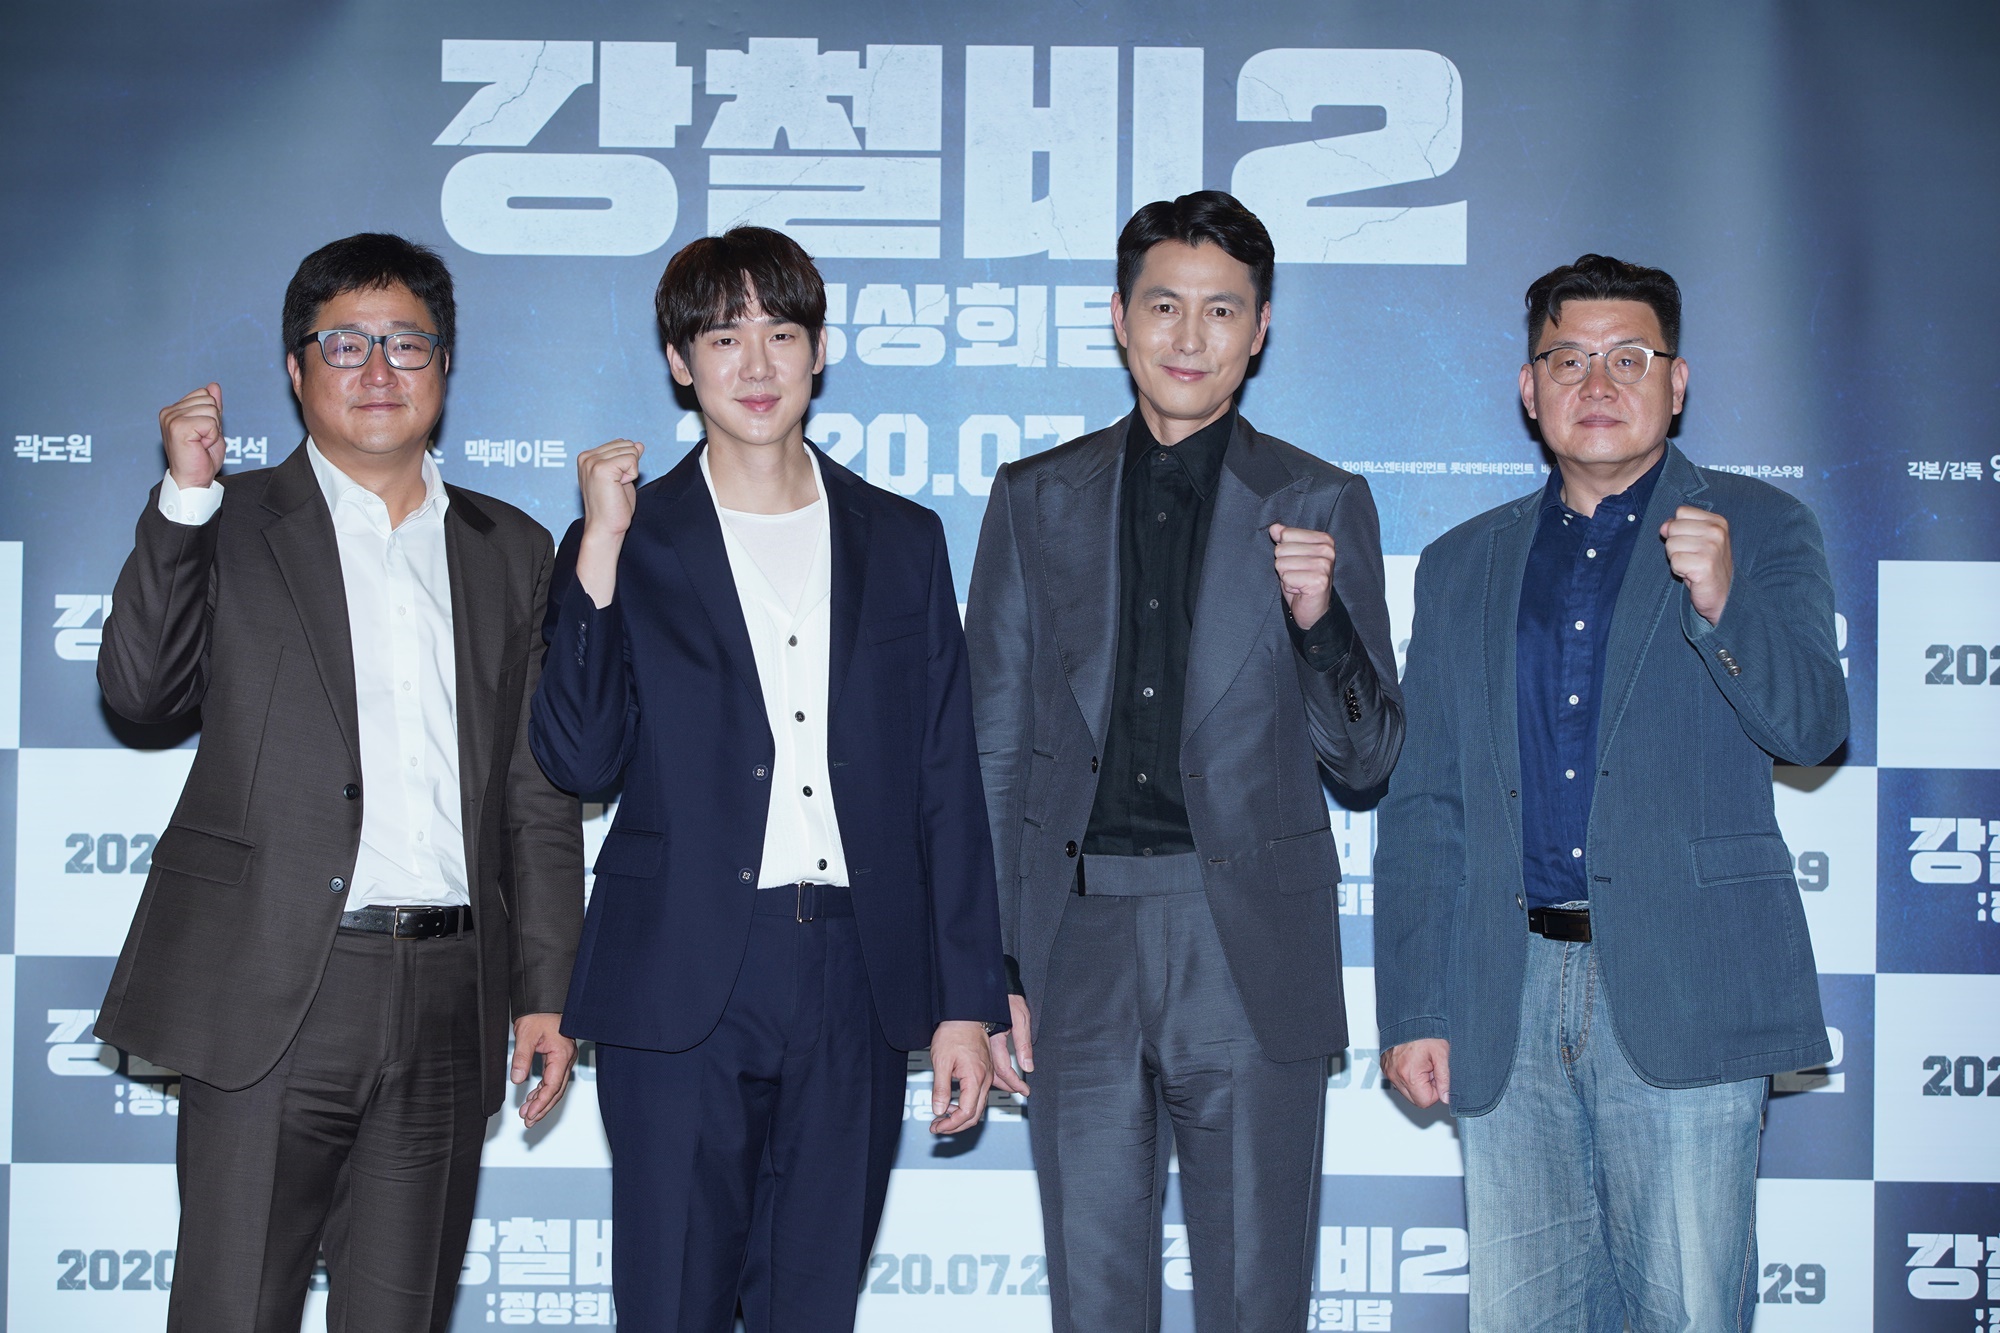 Steel Rain 2, which is scheduled to open on the 29th, is being kidnapped by President of the Republic of Korea (Jung Woo-sung), North Koreas top leader, Chairman of the State Council (Yoo Yeon-Seok), and United States of America (Angus McFadden) who met to conclude the North Korea Peace Agreement. Draws an unexpected Summit that takes place.This <Steel Rain 2> is about the Korean Peninsula inter-Korean relations like the movie <Steel Rain> released in 2017, but it is not a sequel to the contents.Its a complementary sequel, explained director Woo-seok Yang.After the collapse of the Cold War system in 1991, (international) patterns changed, but still for more than 30 years, Korean Peninsula is in Danger.In 2017, the war Danger was inevitably approaching, so I wanted to see what Korea could do if it could decide (on its own).So, I solved the story cinematically through two Cheolwoo (Jung Woo-sung, Kwak Do-won).Actors starring Jung Woo-sung and Kwak Do-won, who starred in the first episode of Steel Rain, appeared as they were, but their roles were completely different.Jung Woo-sung, who played the role of North Koreas most elite agent, Uhm Chul-woo, has been divided into President Han Kyung-jae, who dreams of signing a peace treaty.Jung Woo-sung said, Suddenly, I thought, Why do you keep throwing homework at me?I had a lot of trouble to decide to do it. Jung Woo-sung said he was acting with reference to the previous presidents who led the Summit.It was a Character that was really hard to prepare - I was having trouble getting to know how to approach it.I looked at the history of the presidents who led the North and South Summits and referred to what sentiments they looked at in Korean Peninsula.I think I thought a lot about my personal philosophy or my mission as a politician.What kind of perspective did the presidents who were looking at the future of Korean Peninsula, compassion for our nation and history, lead the Summit?I tried to find out the sentiments of President Han Gyeong-jae in that part of the story. Kwak Do-won, who was the senior presidential secretary for foreign affairs and security in the first episode, transforms into Park Jin-woo, the director of the North Korean hardline escort, who opposes the abandonment of nuclear weapons and the establishment of a peace regime.In the movie, he leads a coup and kidnaps three leaders with nuclear submarines, making the situation extreme.Kwak Do-won said, I was expecting that the bishop would do <Steel Rain 2>, so I would be president or class.He then said: I thought (Park Jin-woo) should not be a villain and I took an Act.I thought that I represented one of the two conflicting positions that North Korea shows on the world stage.I had a lot of troubles (before I took over the role), but the scenario was so fun. I was looking forward to the full change in the role with the first.I was curious because I was the first North Korea military role. As Actors change their camp and act, I wanted to show you the irony that even if the South and North positions change, the current system is unlikely to change, said Woo-Seok Yang, director of the major actors.Instead, the actors who came out of United States of America, China and Japan in the first episode are Acting.Even if the South and the North change, the external factors have not changed, so two more than one may come more sadly. Yoo Yeon-seok, who has been acting as North Koreas chairman of the State Council, has joined the new Steel Rain 2.Yoo Yeon-Seok confessed that he tried to draw anguish as a young man who came to the top leadership position at a young age within the cinematic imagination.The joint inter-Korean liaison office was blown up in June, and North Koreas offensive against South Korea continues every day.The South-North relationship, which has been in a sharp downturn, may be a bad external condition for the movie Steel Rain 2.Director Woo-seok Yang emphasized that he nevertheless included the film Gaya as a peace regime.I think that after the Cold War collapsed, inter-Korean relations had changed little; the answer was clear and it was reconciliation mode, tension mode, and a spiral of the pattern.However, if there is a big change in the last two to three years, there is exactly Korean Peninsula between the US and China.The pattern of the roadblock should be broken now. Maybe Gaya will be built by peace.As many will understand, the tension and division of the Korean Peninsula is beneficial to all but the Korean Peninsula party.It is hard to blame it for being morally bad. It is actually returning to the national interest.But tension and conflict are pain for us living in Korean Peninsula. For us to prosper, the peace regime will be a very good enough condition.But we cannot go (to peace) on our own, trying to melt those contents into the work as much as we can.On the other hand, Actors and Woo-seok Yang showed concern about opening the movie in a situation where the number of audiences looking for the theater was very reduced due to the spread of Corona 19.Director Woo-seok Yang said, We are doing a much more thorough prevention in the theater than you think.I would like to say that you are coming to me, but if you want to see the results of our efforts as best as possible, please wear a mask and come to the theater. Jung Woo-sung also told the audience about the audience.Maybe the corona 19 is affecting our entire lives - theres an uneasy mind about opening a movie at this time.I am worried and old-fashioned that you should enjoy the movie safely when you come to the theater. I do not know what will happen, but I met the fate of the movie on the 29th.I would like you to wear a mask and enjoy the movie safely for those who visit the theater. The Report on the Production of the Film 